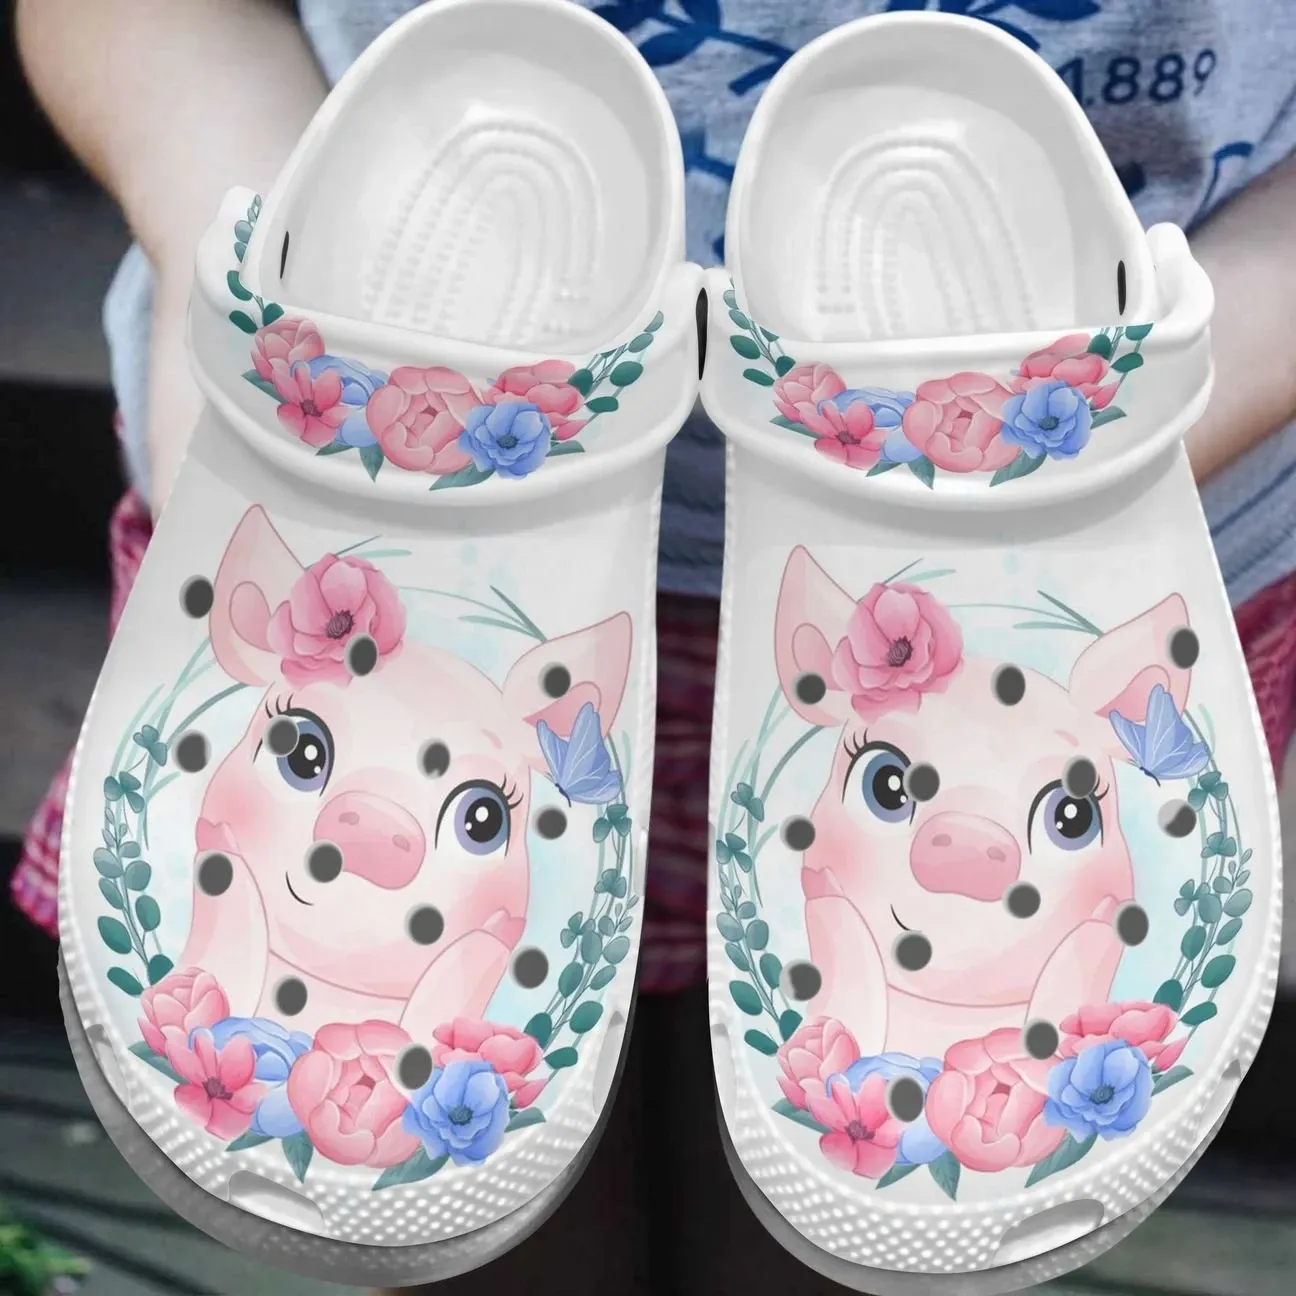 Pig Personalize Clog Custom Crocs Fashionstyle Comfortable For Women Men Kid Print 3D Baby Pig